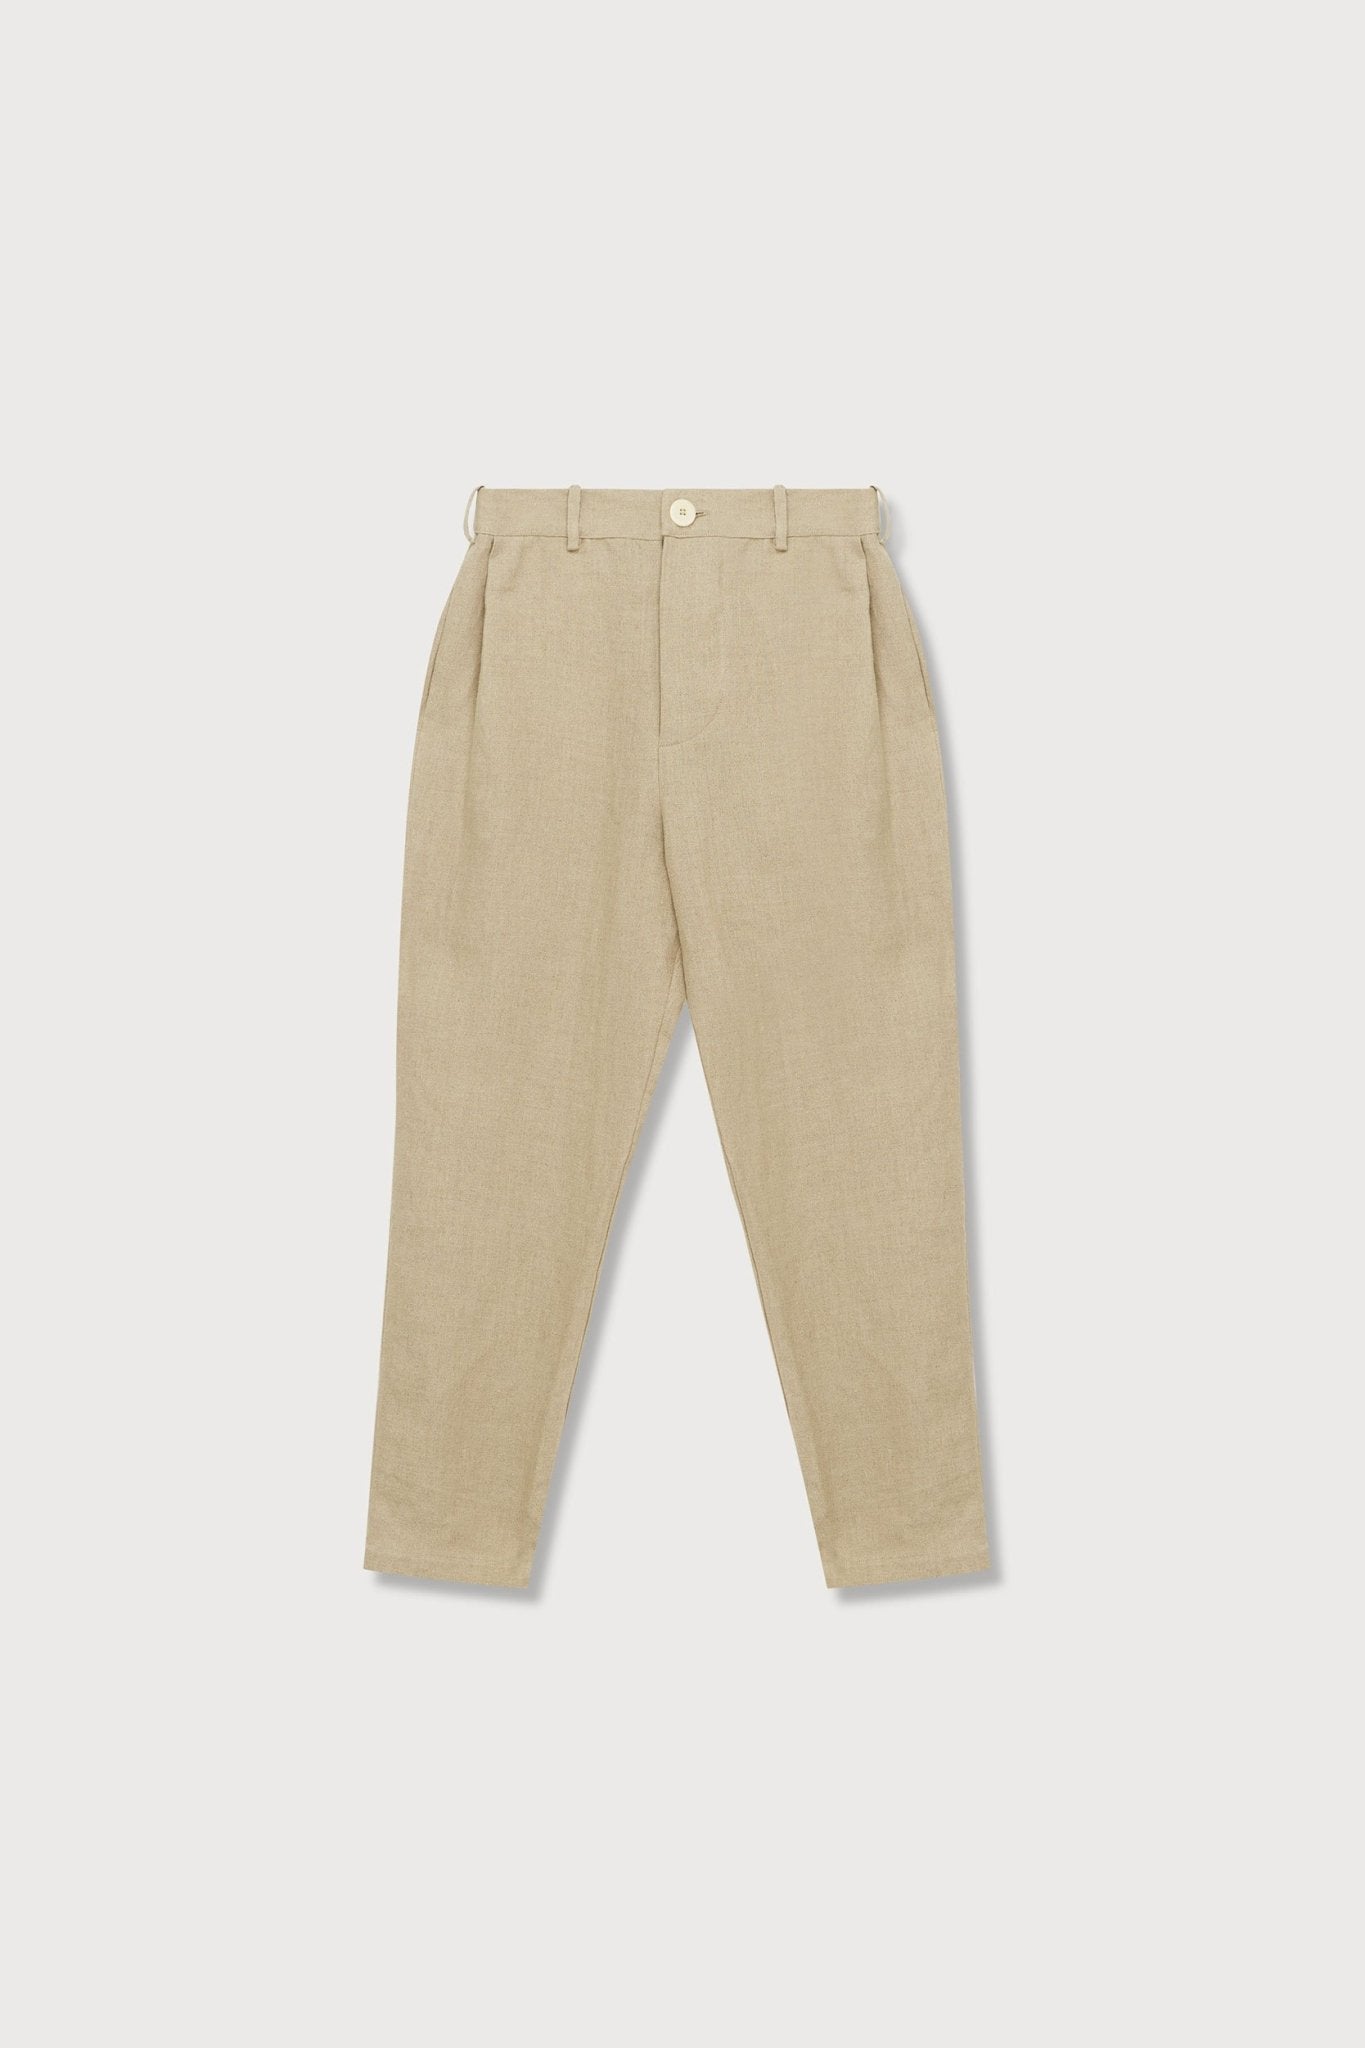 A.BCH A.18 Undyed Semi-Tailored Trousers in Organic Linen